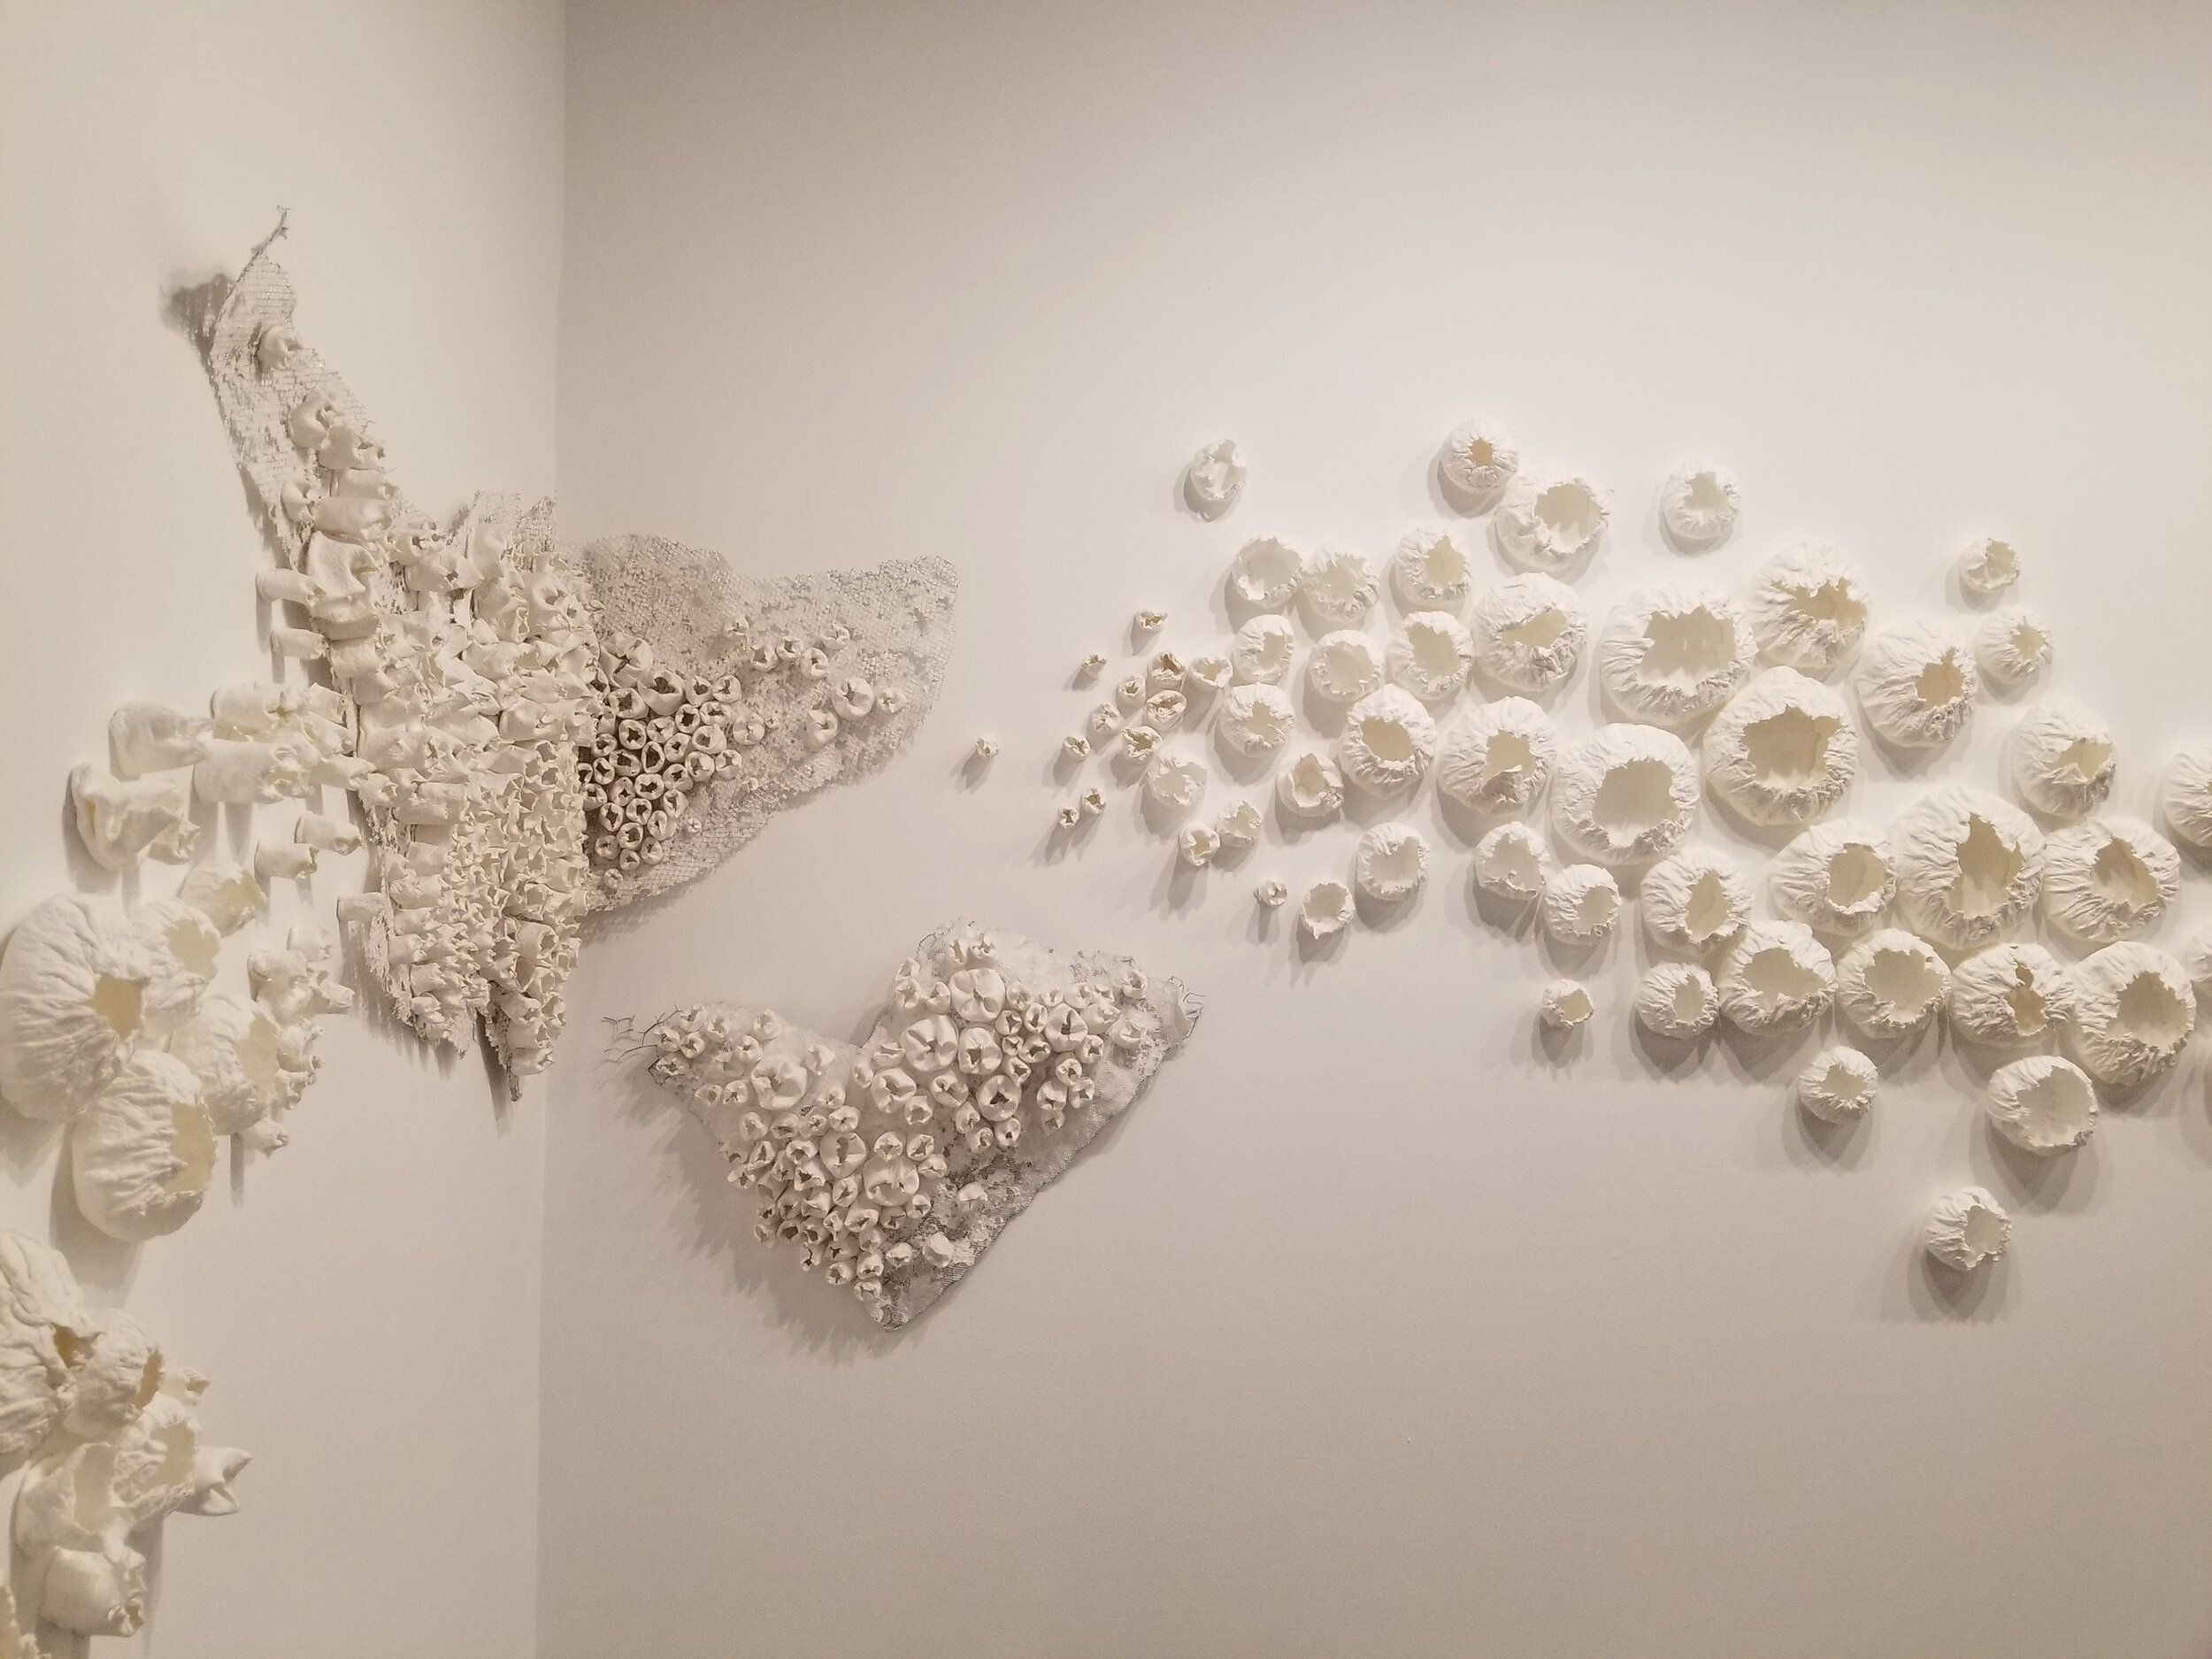  Accumulation, 2019, handmade cotton paper, wire mesh, dimensions variable     